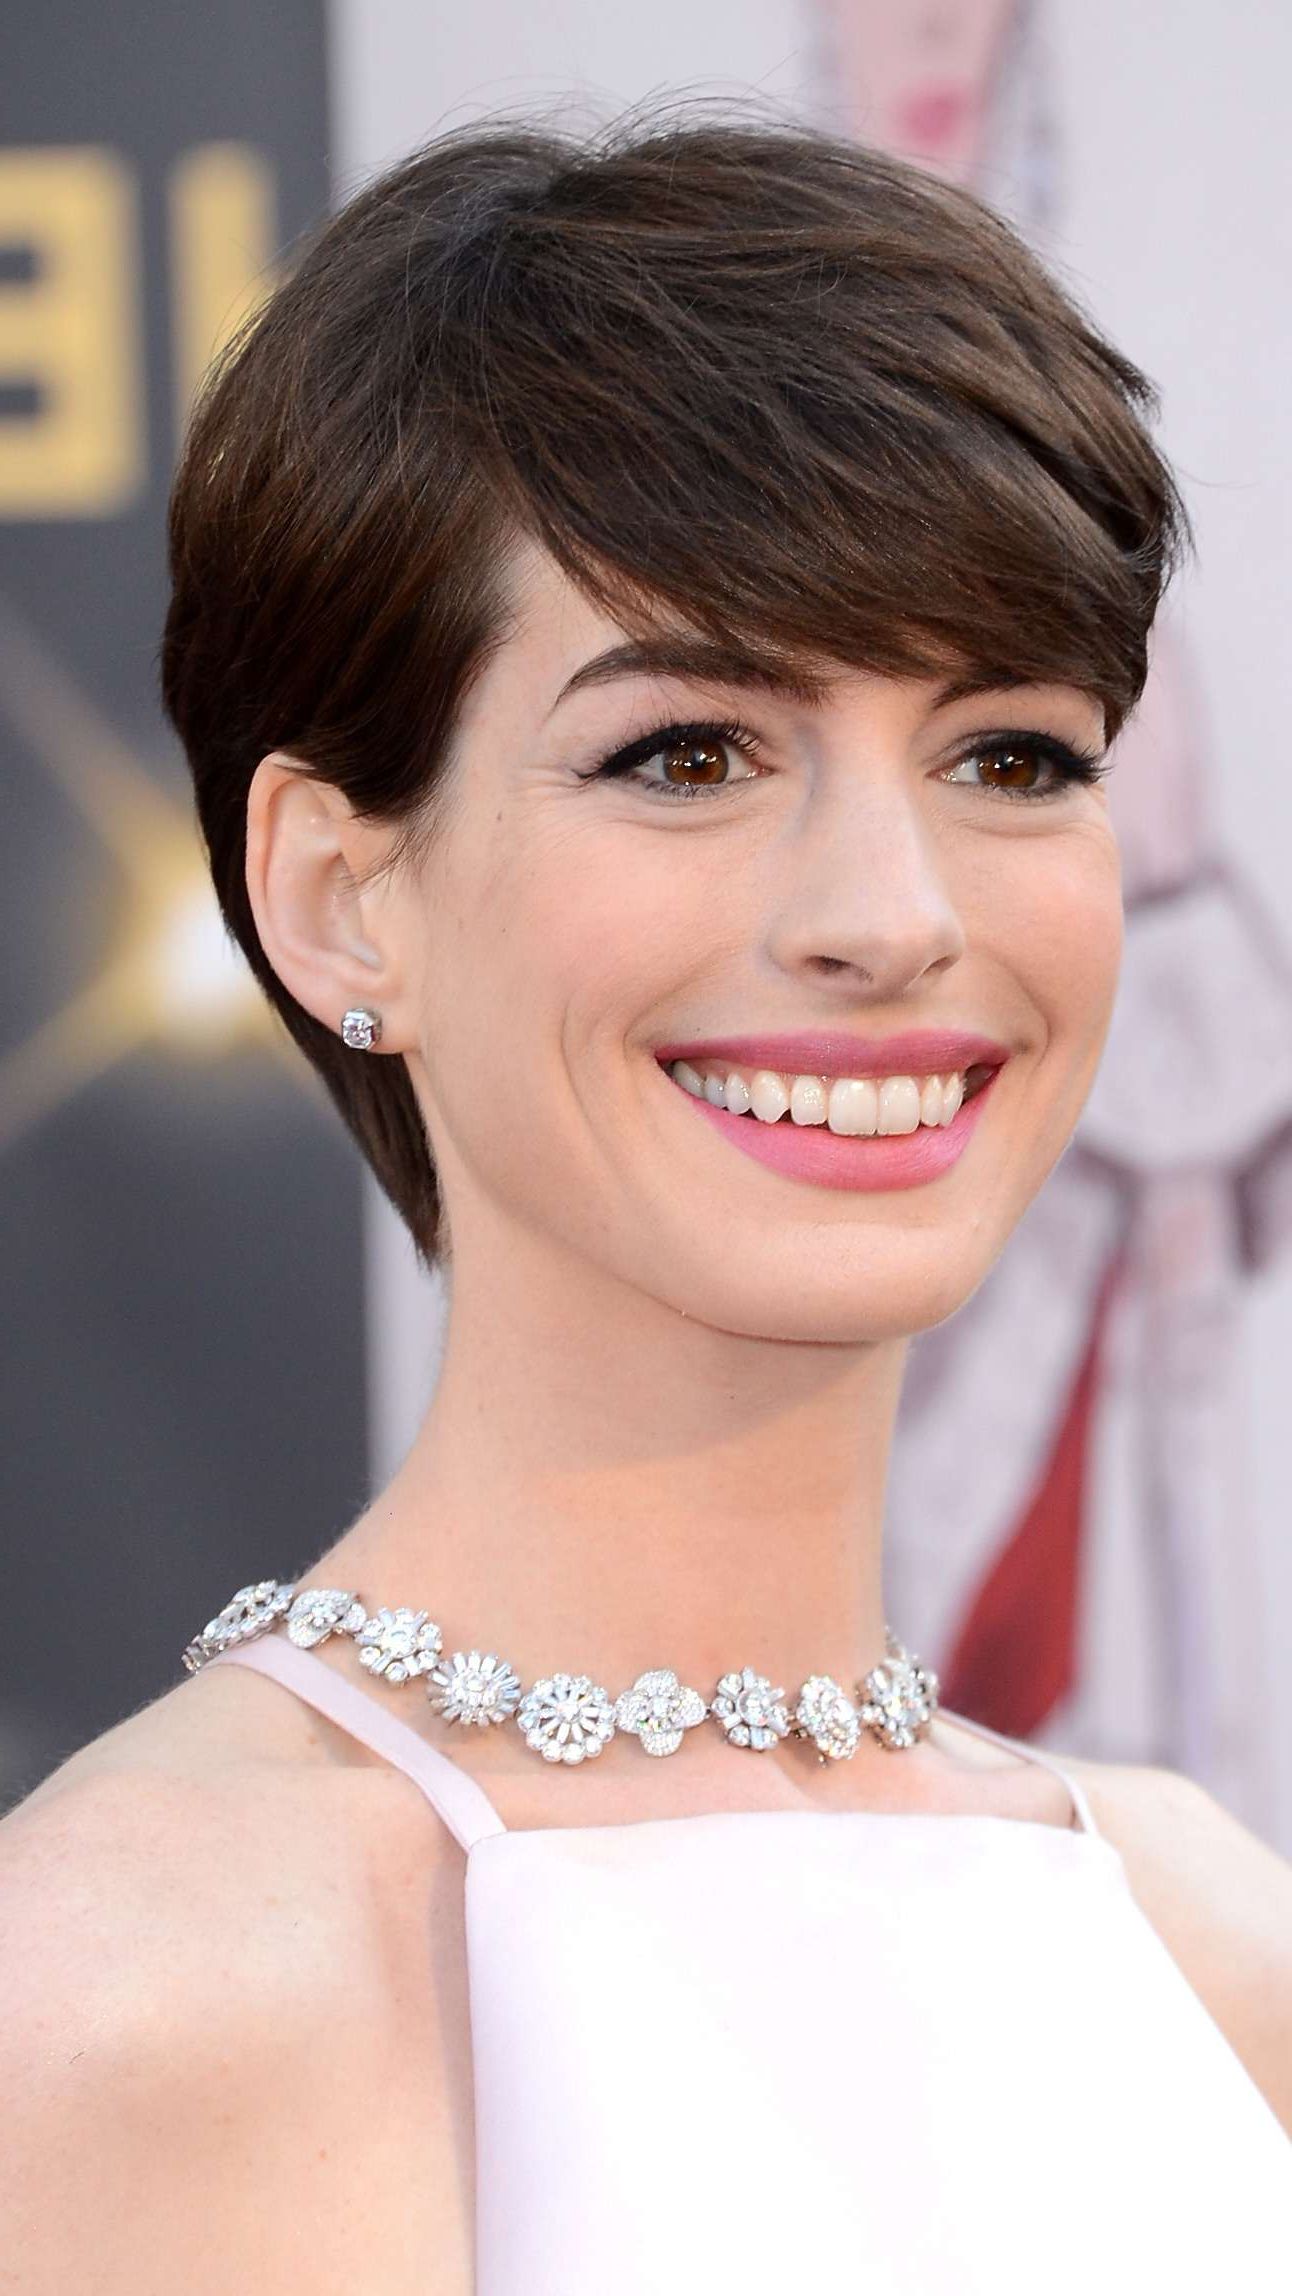 22 Inspiring Short Haircuts For Every Face Shape Throughout Short Hairstyles For Women With Oval Faces (Photo 12 of 25)